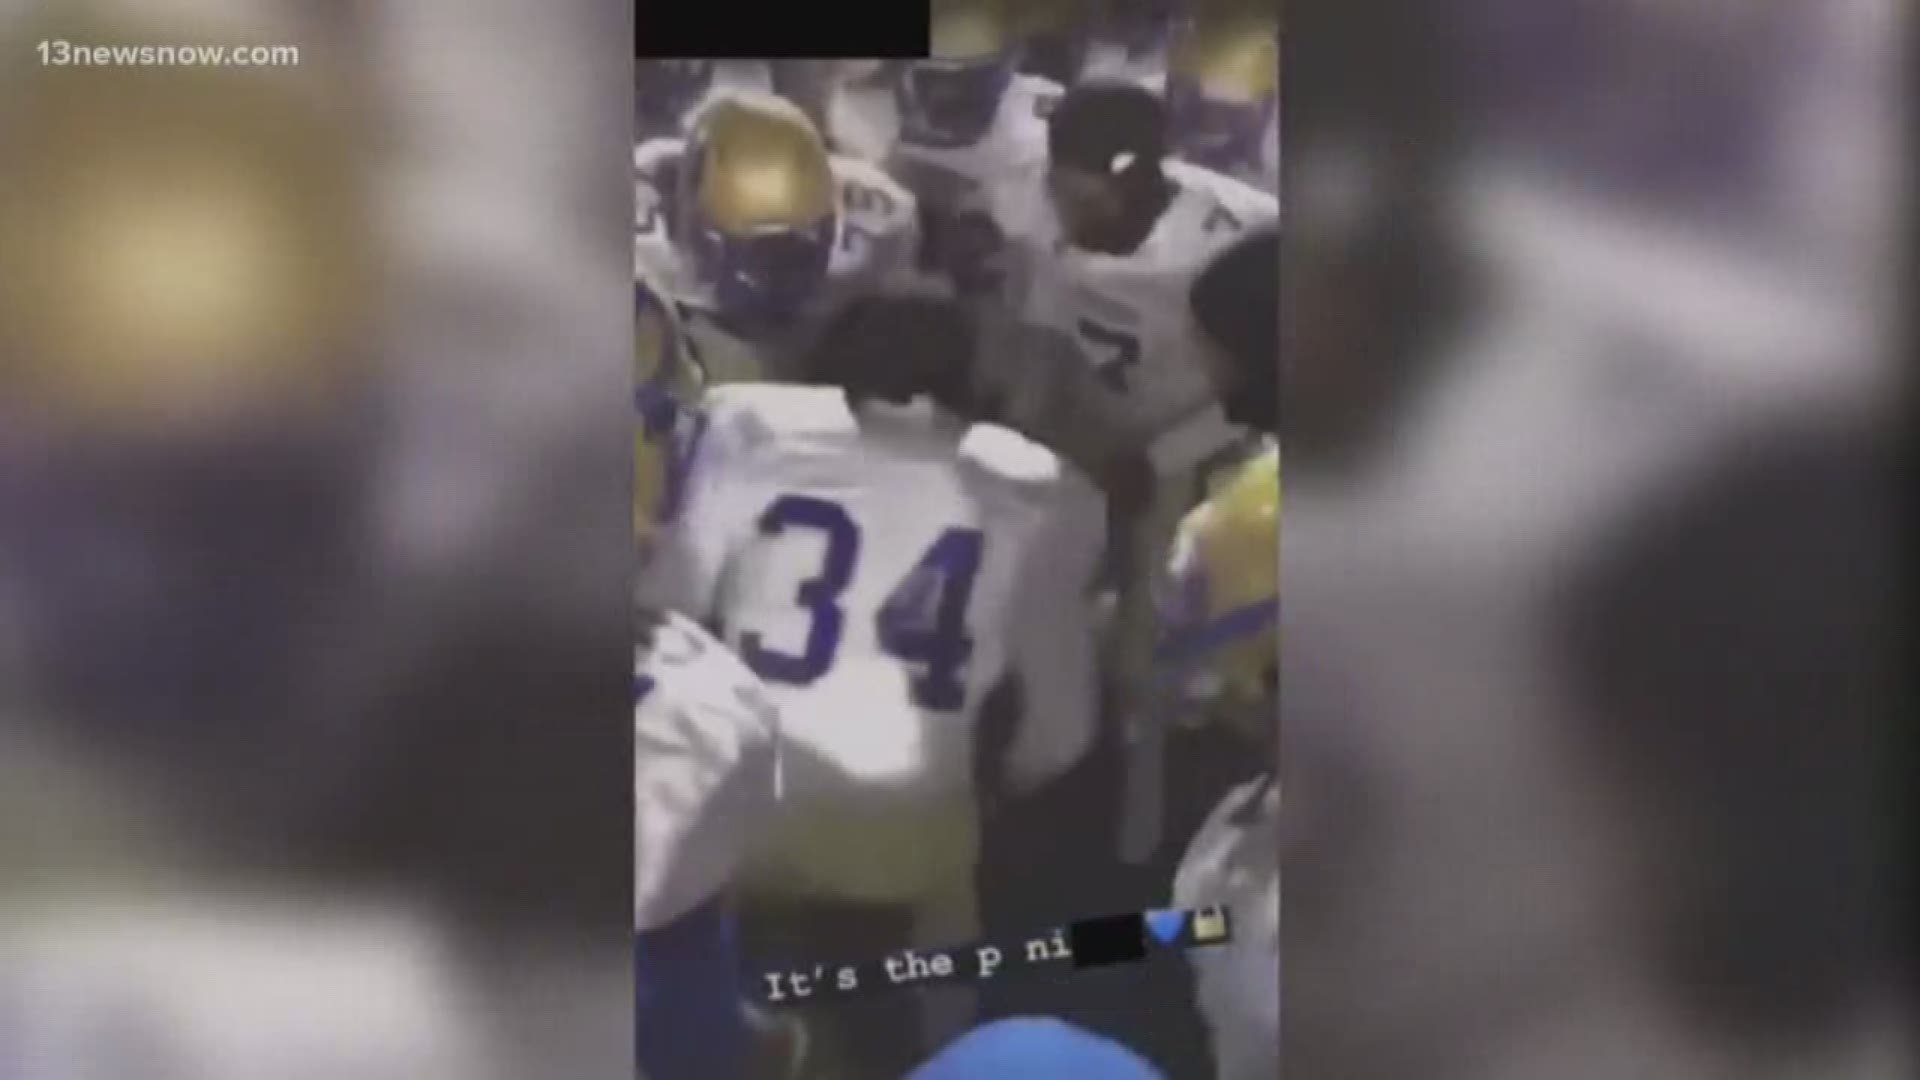 Virginia High School League said video of players chanting the N-word led to the warning. Another serious infraction could keep the football team from playoffs.